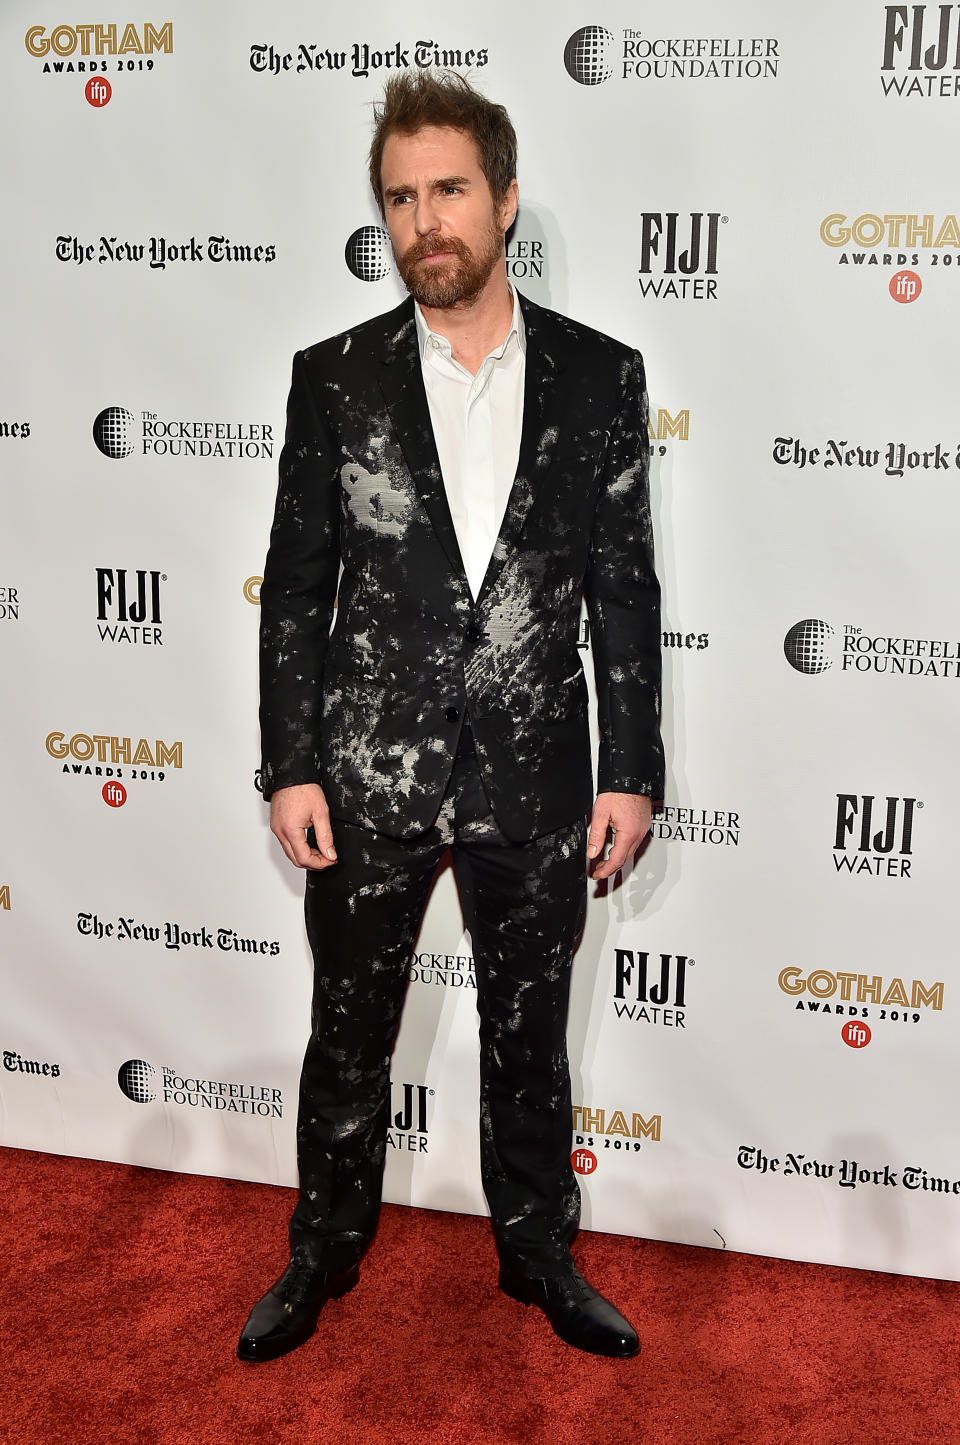 Sam Rockwell at the Gotham Independent Film Awards in New York City on Dec. 2.